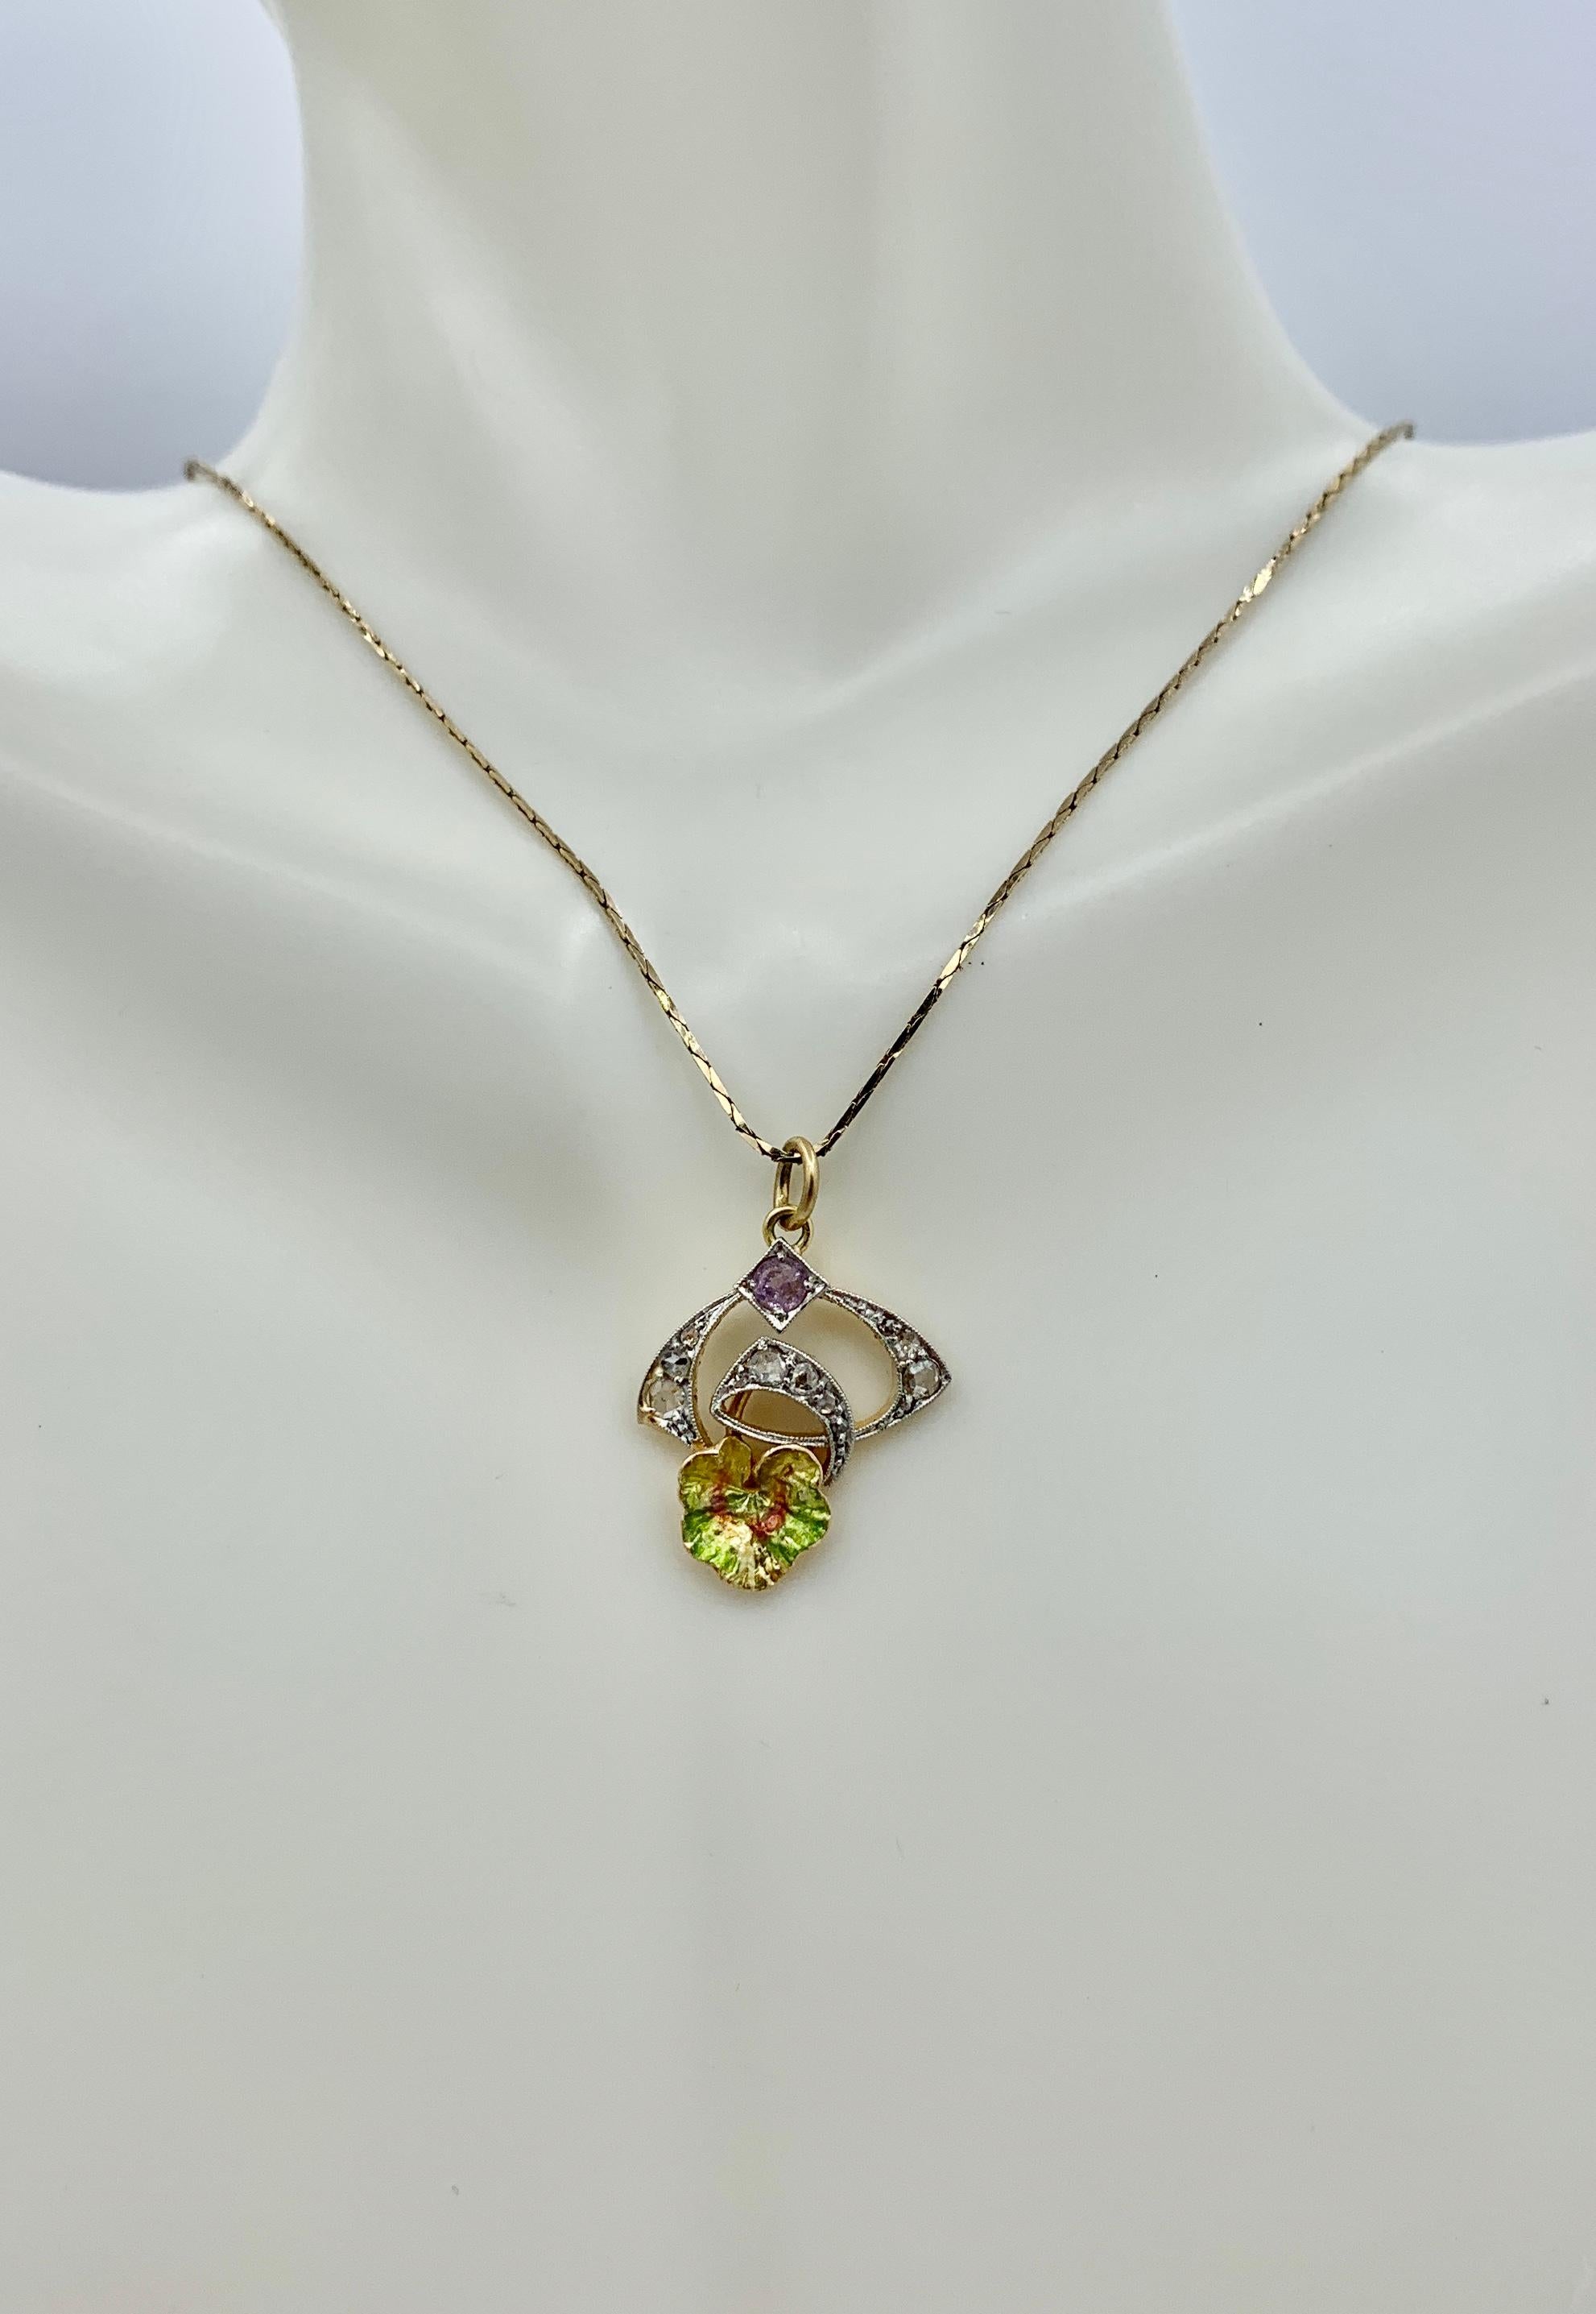 THIS IS A WONDERFUL ORIGINAL ART NOUVEAU PENDANT OR CHARM IN A STUNNING FORM WITH ROSE CUT DIAMONDS, 
 AND AMETHYST, IN 14K WHITE AND YELLOW GOLD WITH A GORGEOUS TRANSLUCENT GREEN ENAMEL LILY PAD LEAF AT THE BASE, AND DATING TO CIRCA 1910.
This is